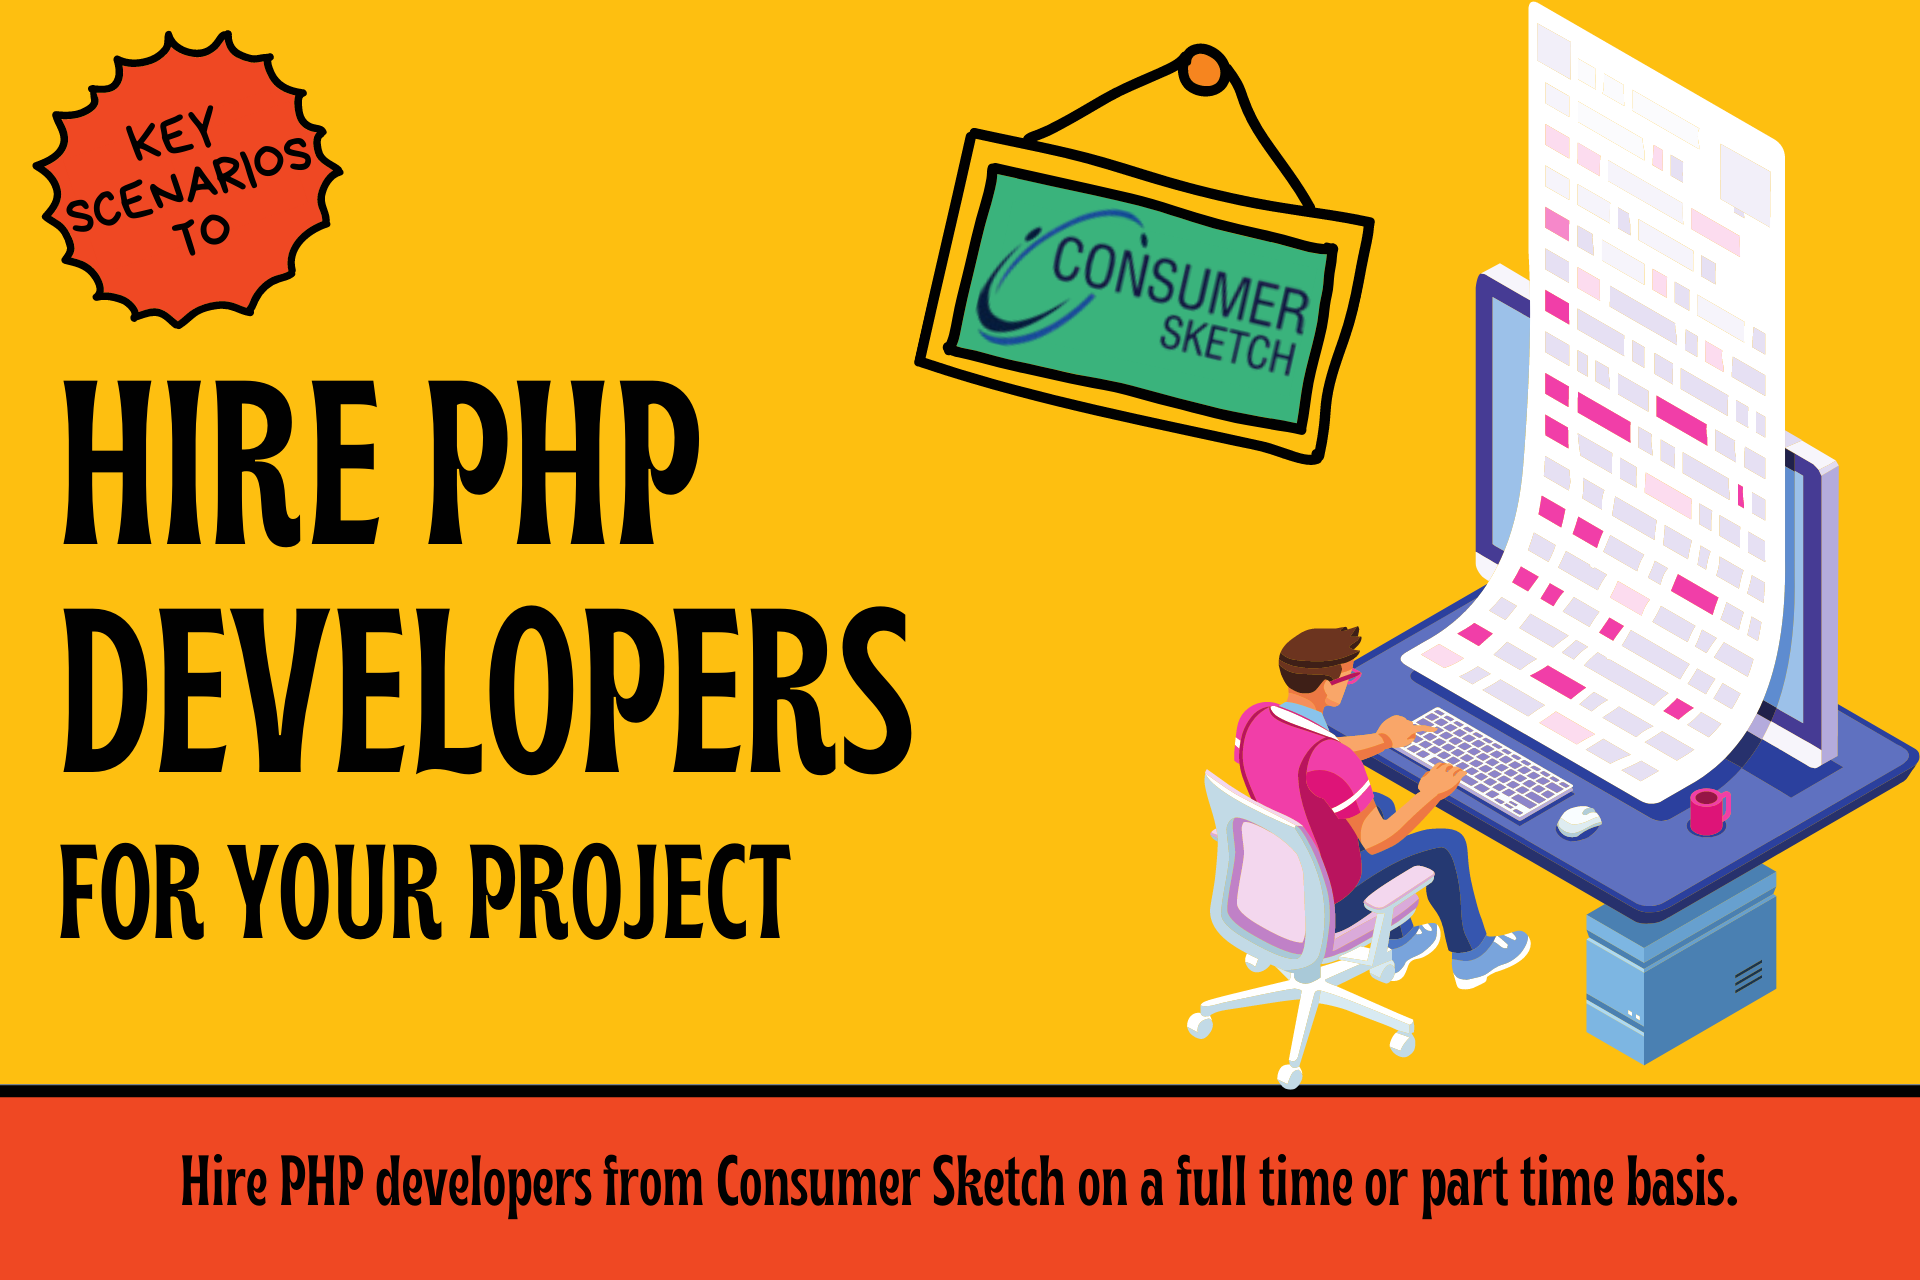 Key Scenarios to Hire PHP Developers for your Project